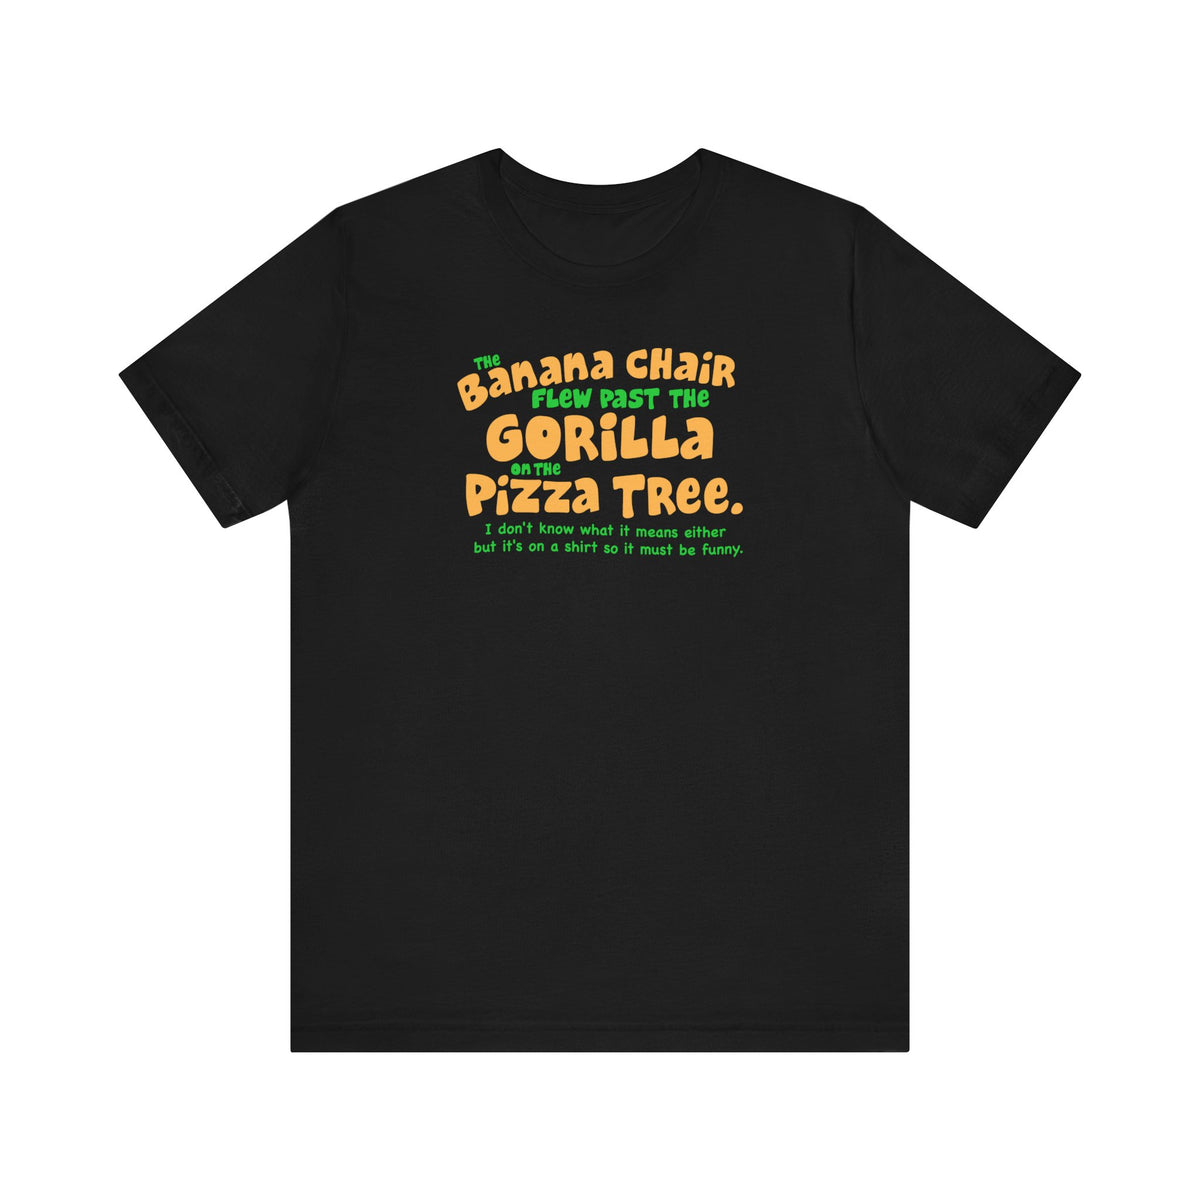 The Banana Chair Flew Past The Gorilla On The Pizza Tree - Men's T-Shirt